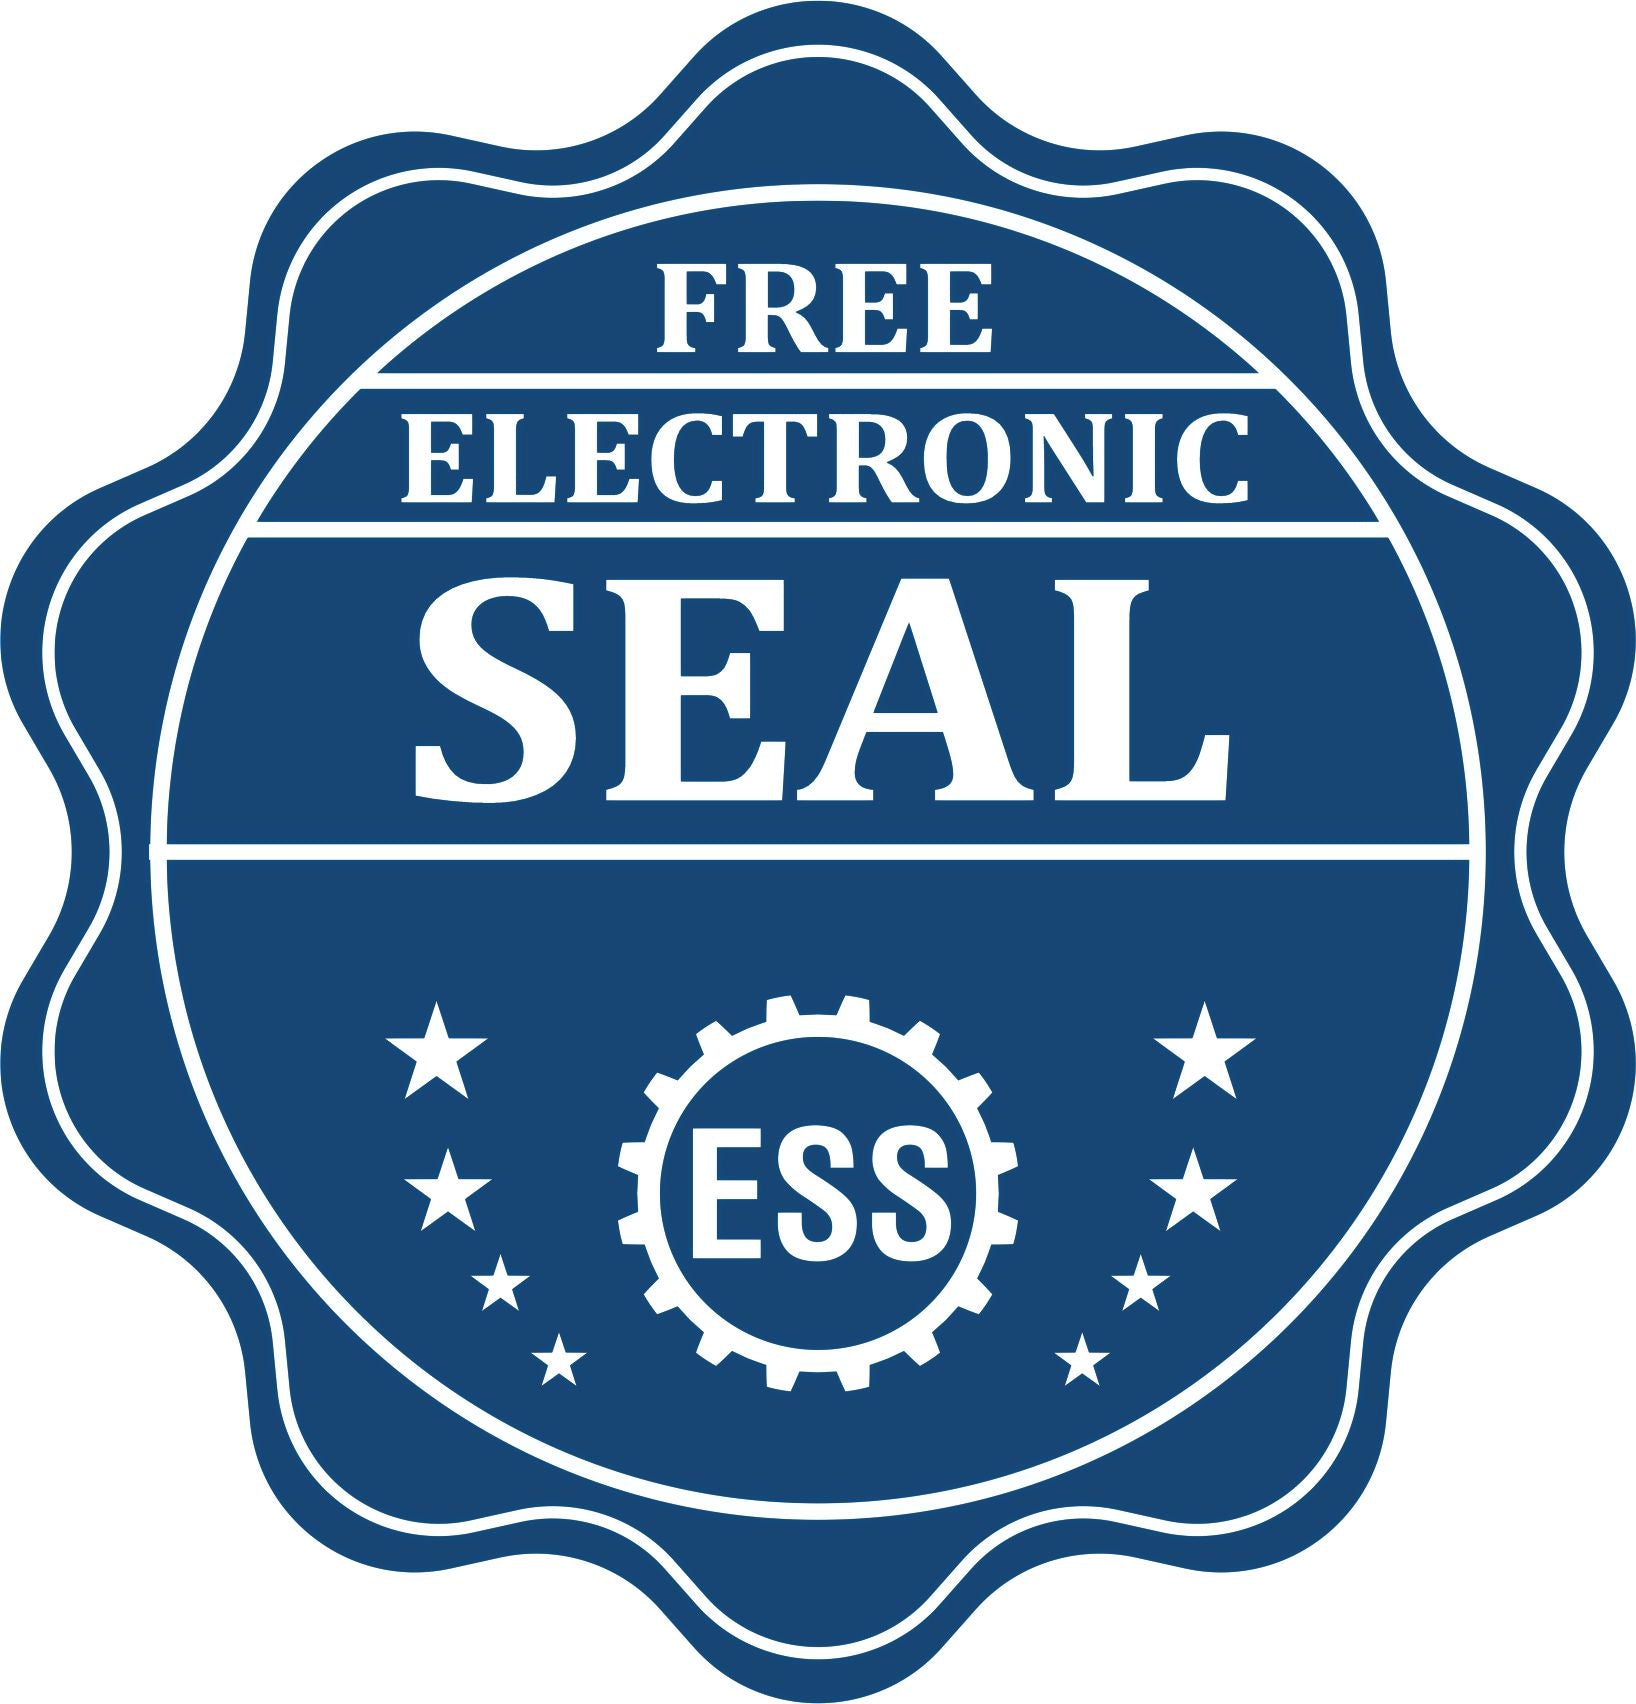 A badge showing a free electronic seal for the Premium MaxLight Pre-Inked New York Engineering Stamp with stars and the ESS gear on the emblem.